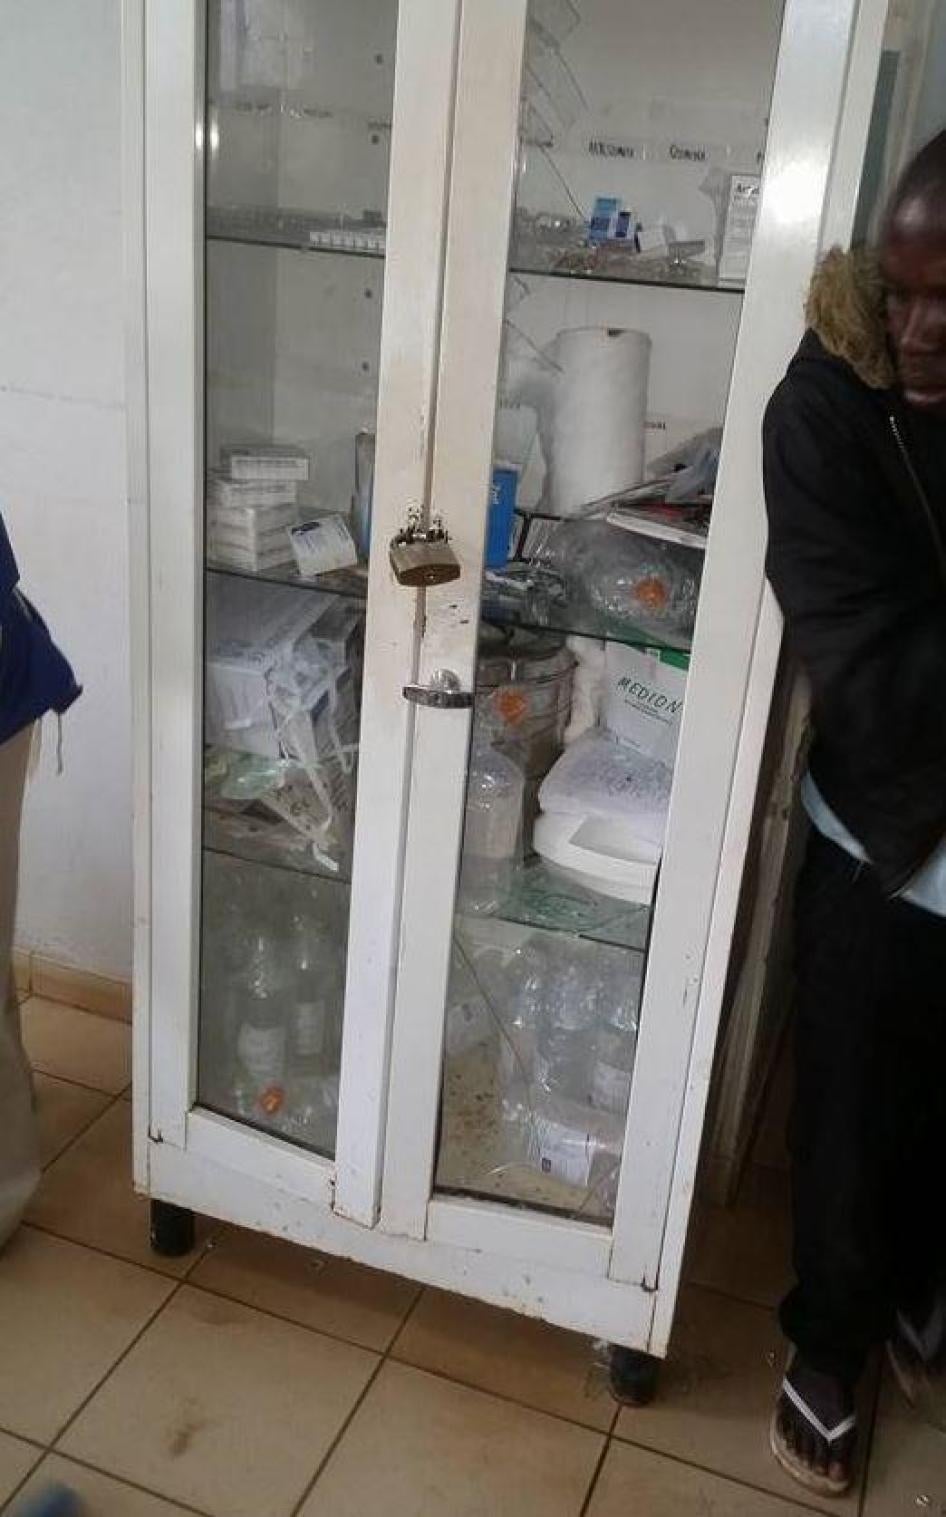 Damaged medicine cabinet in Morrumbala District Hospital after the raid by RENAMO gunmen on August 12, 2016. 